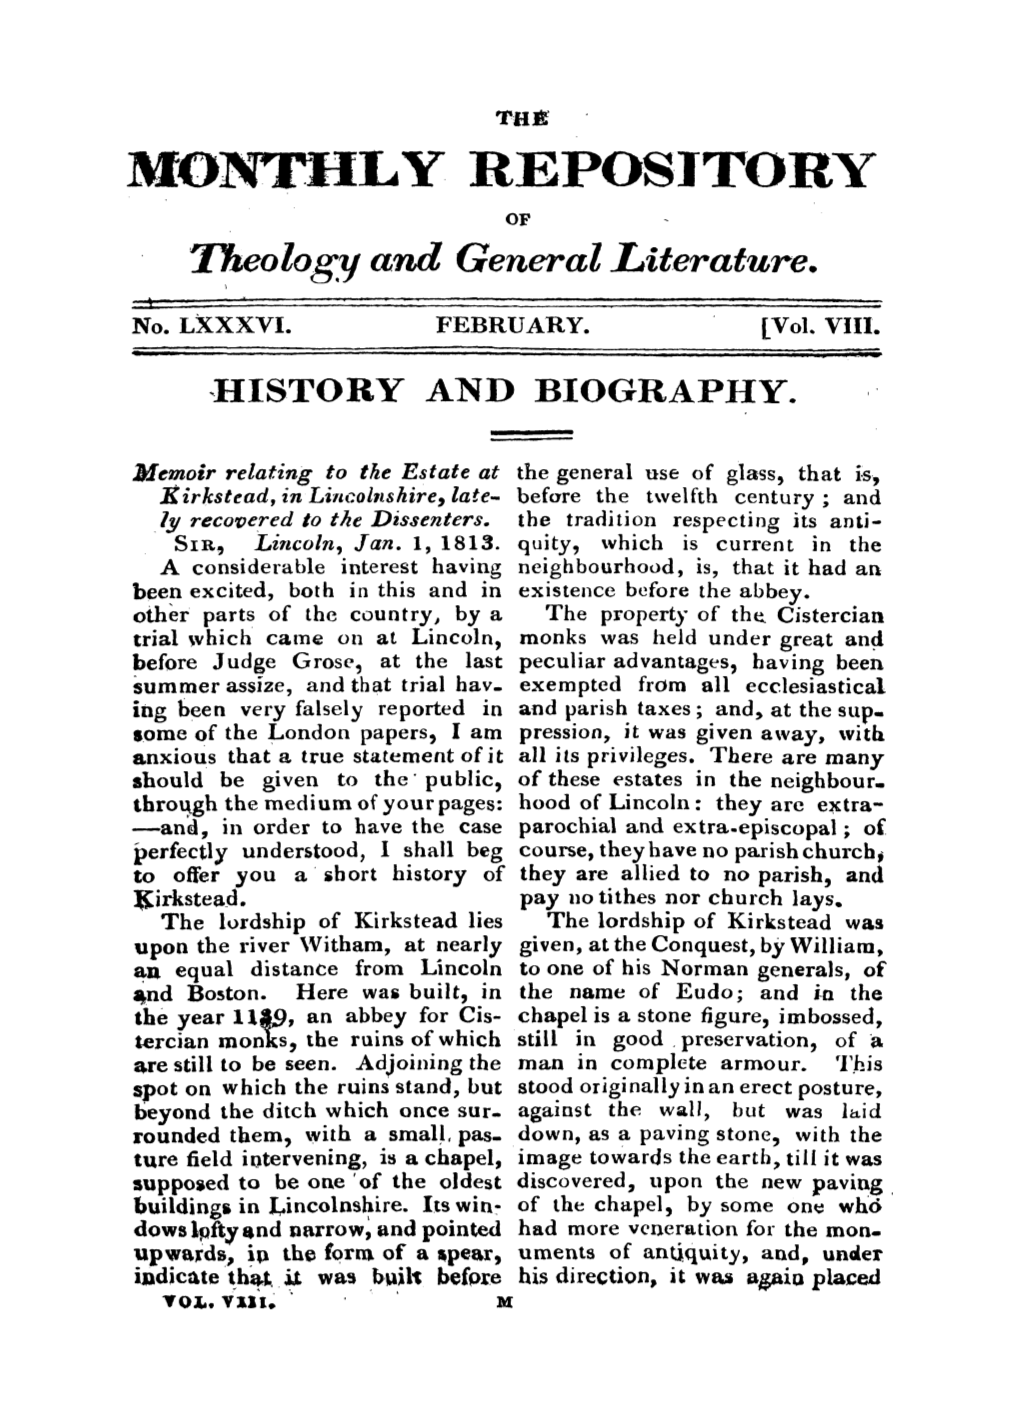 Page 1 the MONTHLY REPOSITORY of Theology and General